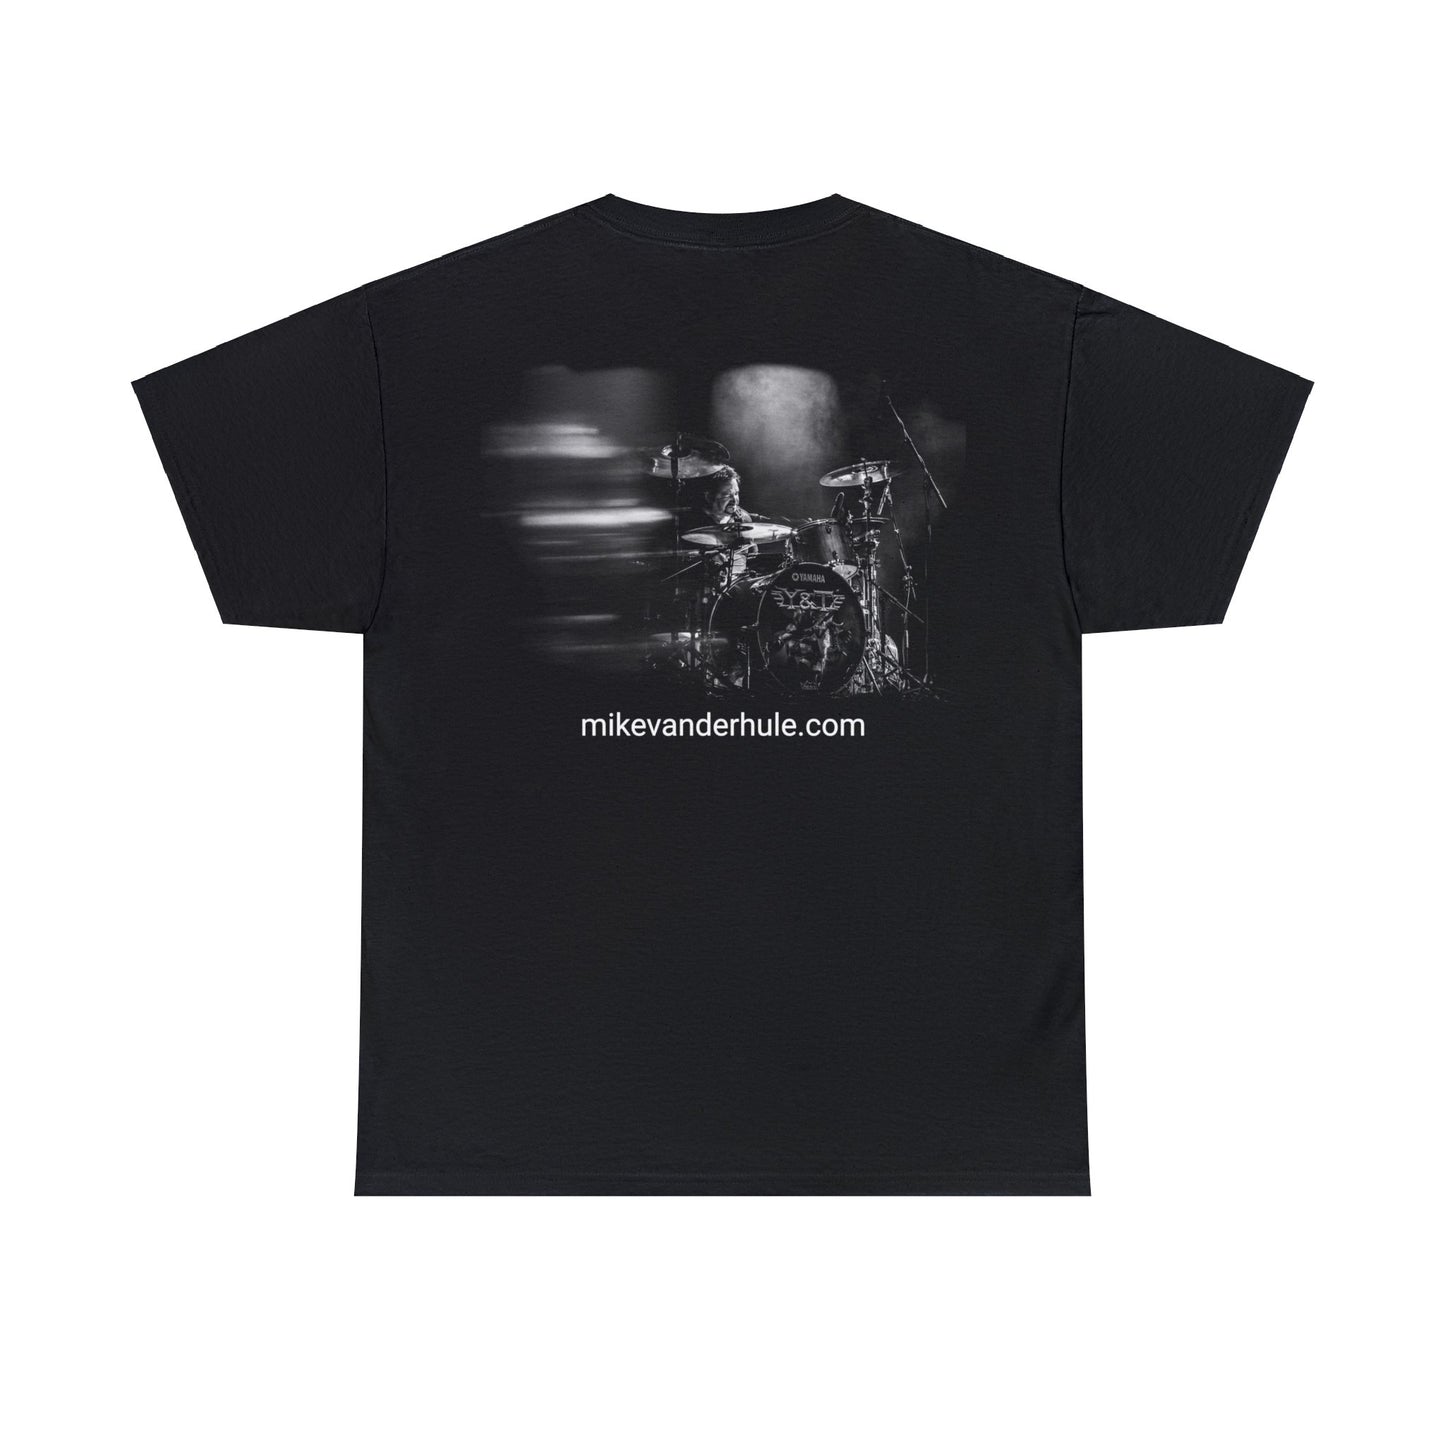 MV Pocket-Logo w/"In the Moment" Photo on Back T-Shirt